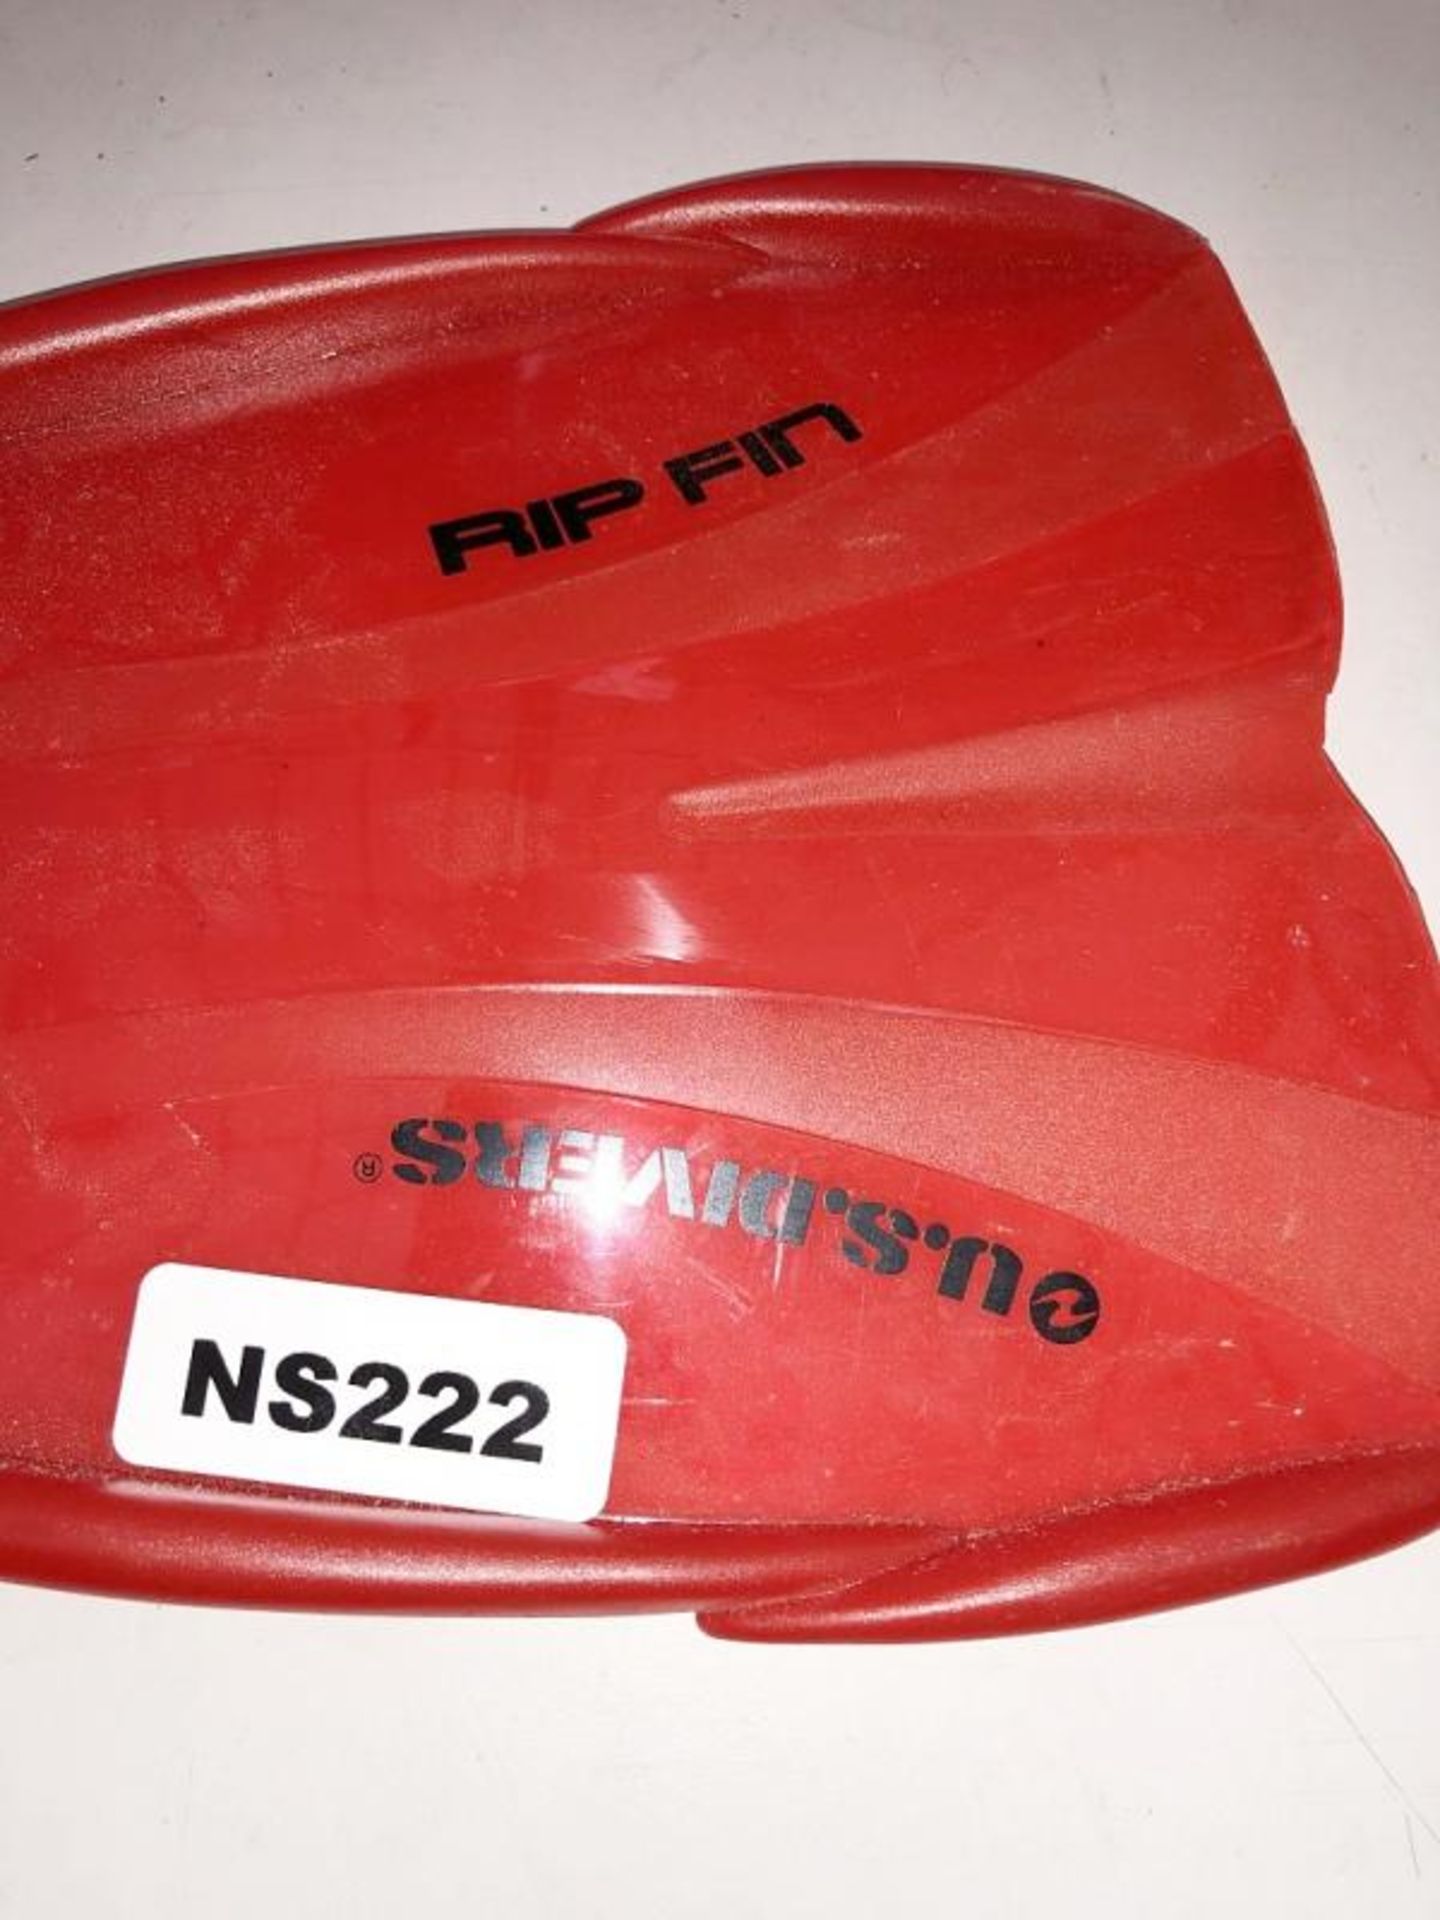 3 x Pairs Of Children's Diving Fins - CL349 - Location: Altrincham WA14 - Image 5 of 9